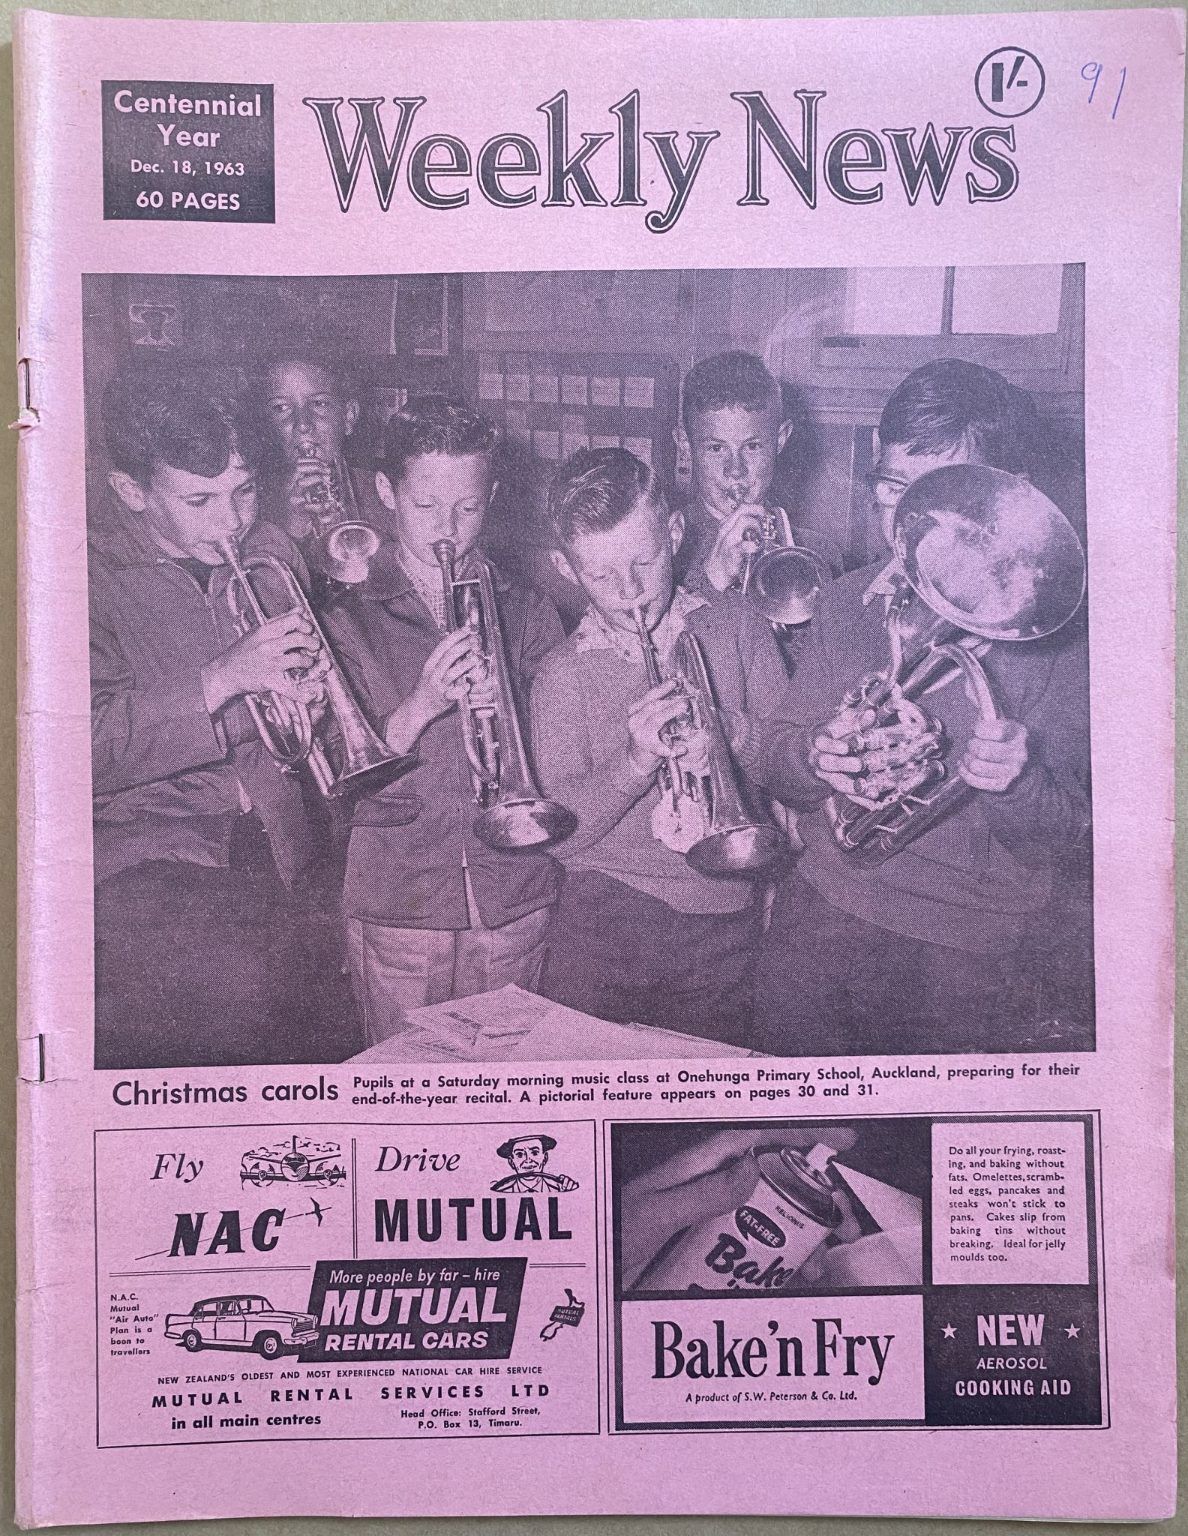 OLD NEWSPAPER: The Weekly News, No. 5221, 18 December 1963